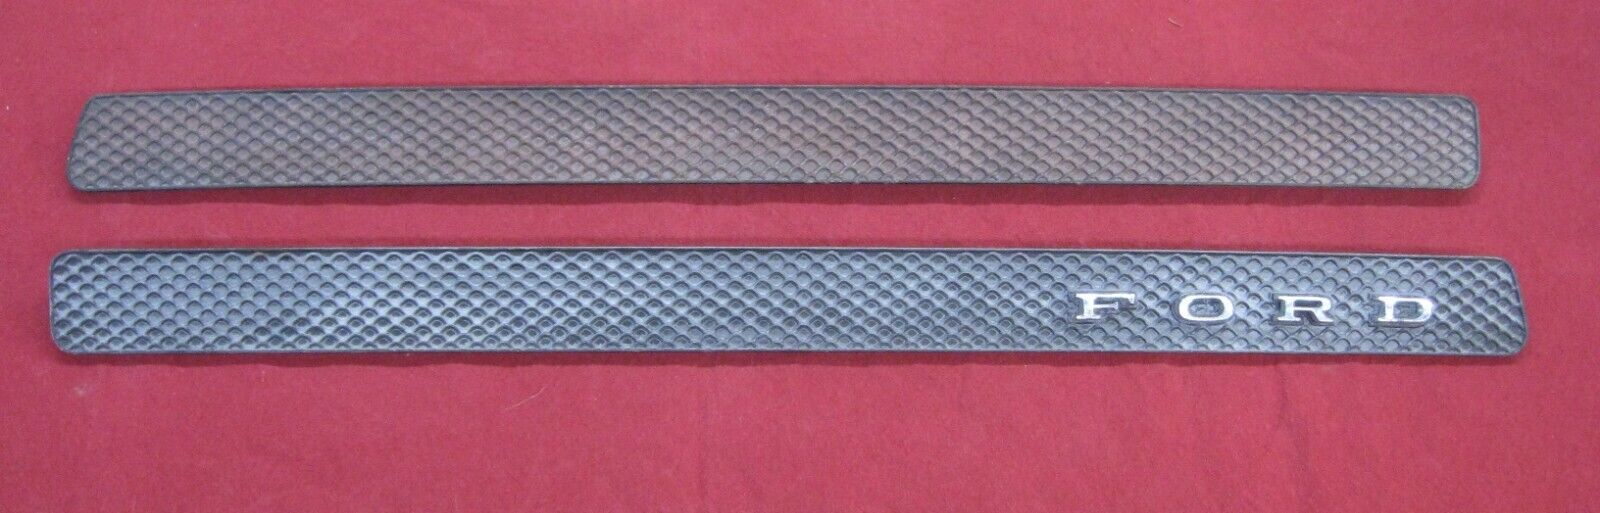 1970-71 FORD TORINO GT TRUNK LID TRIM MOLDING PAIR, OEM D0OB63425A38 & 39A USED